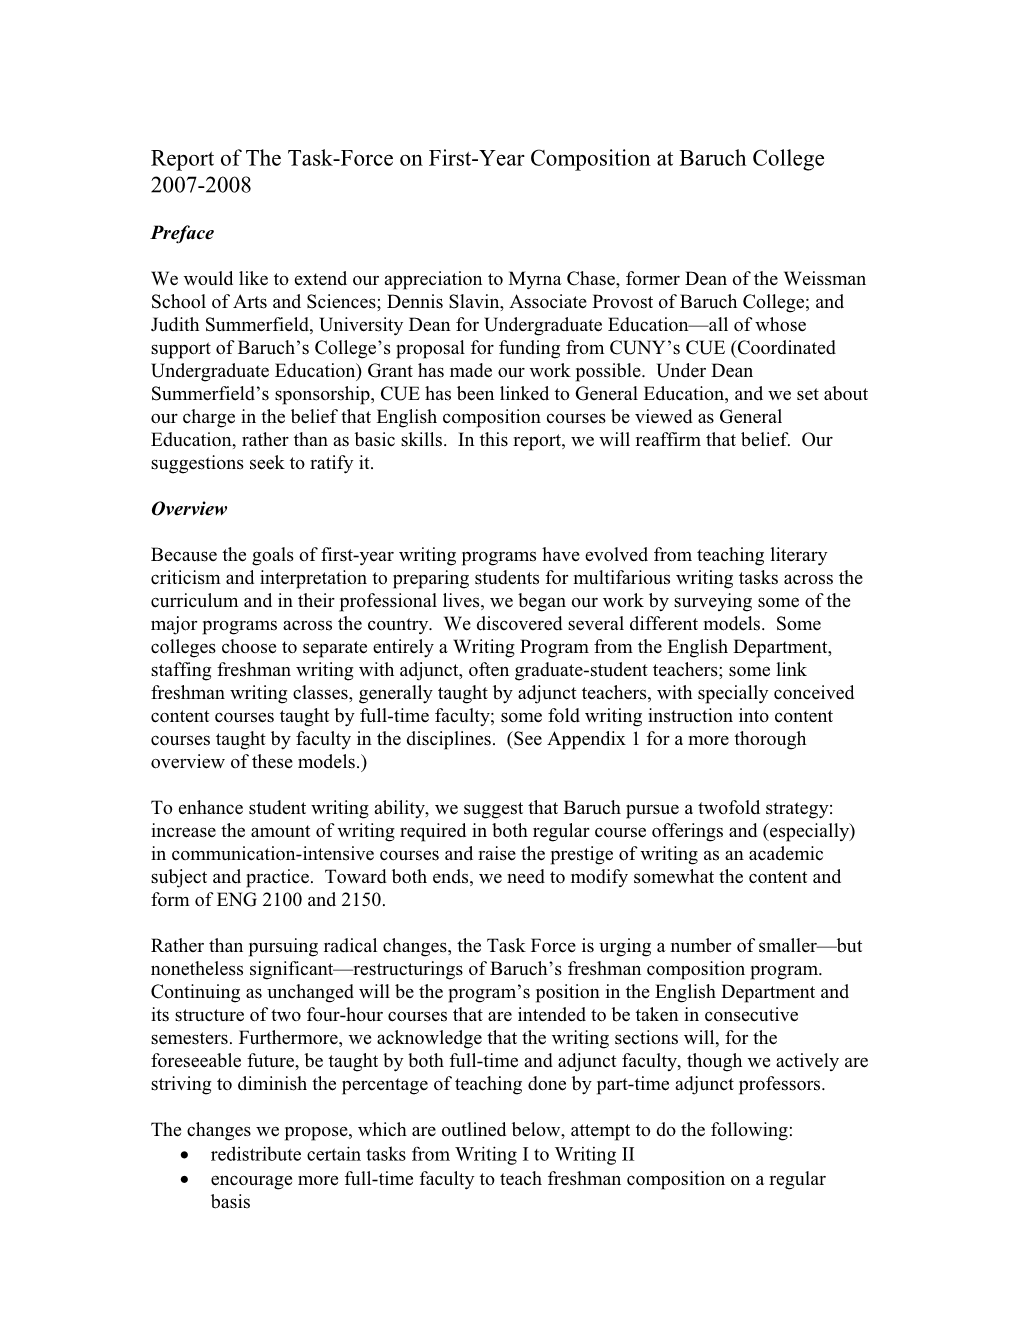 Report of the Task-Force on First-Year Composition at Baruch College